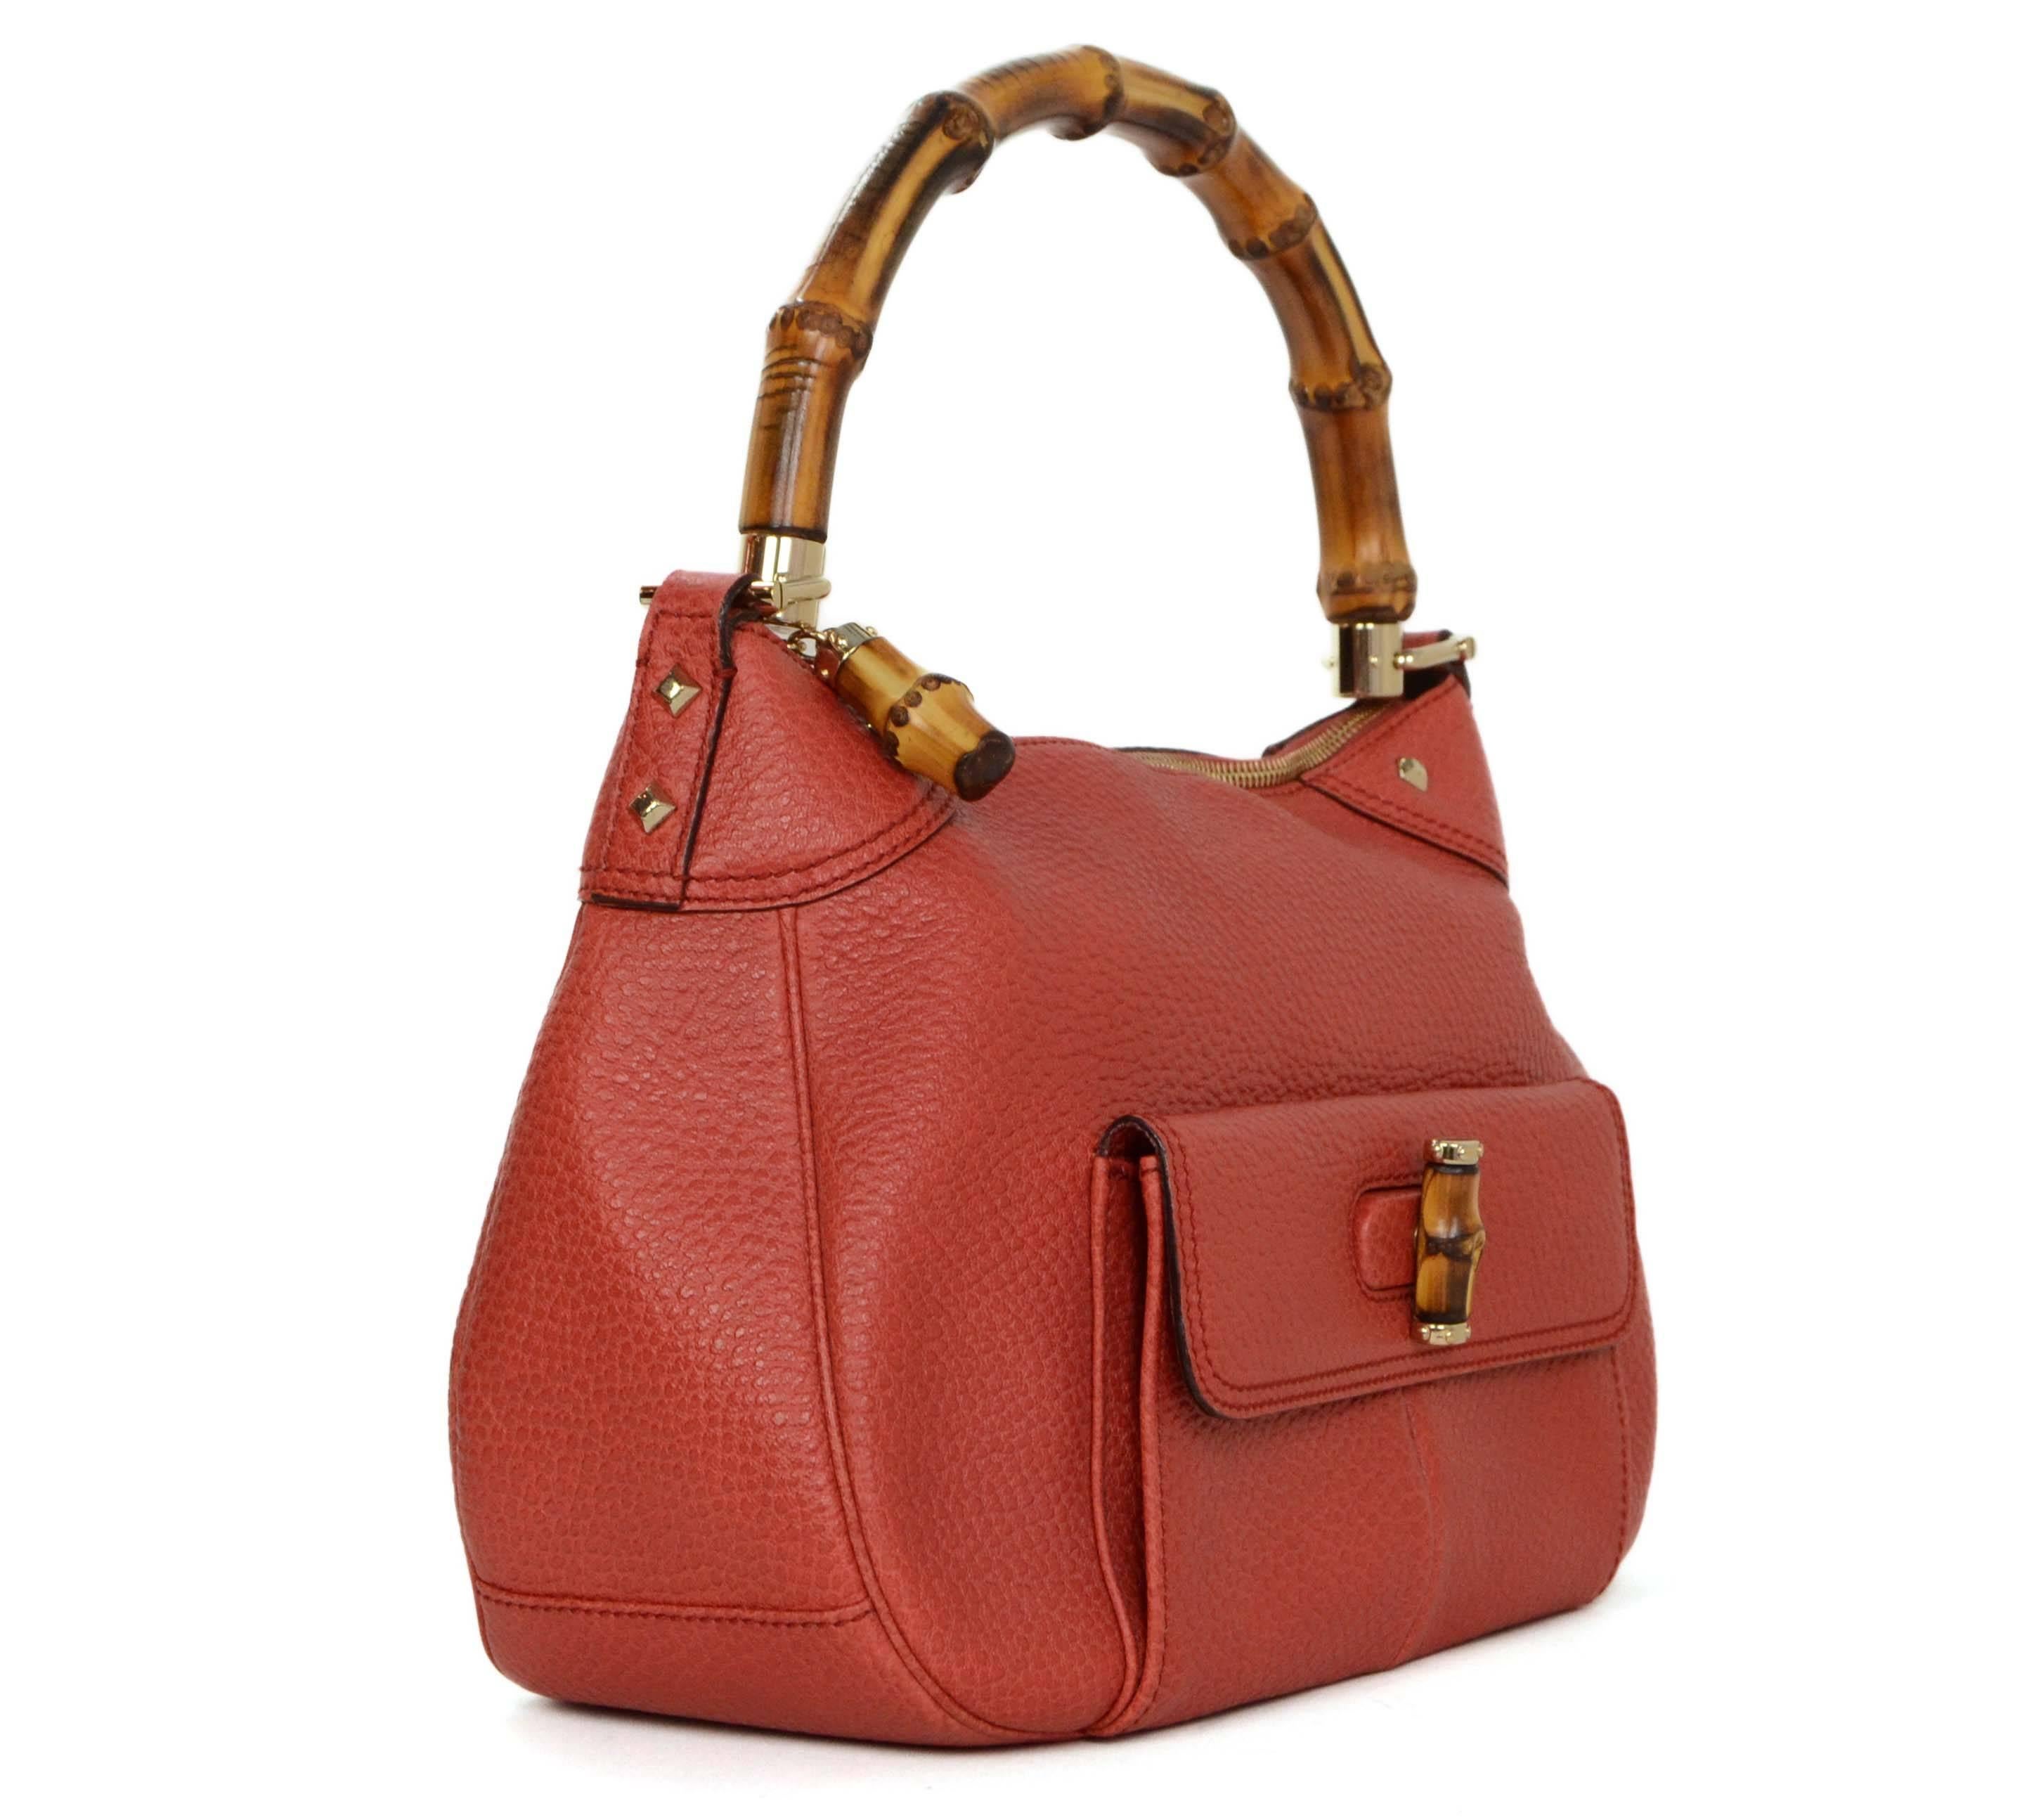 Gucci Orange Leather Bamboo Bag 
Features bamboo handle, zipper pull and front pocket twist lock closure
Made In: Italy
Color: Orange
Hardware: Bamboo and goldtone
Materials: Leather, bamboo and metal
Lining: Brown canvas
Closure/Opening: Zip